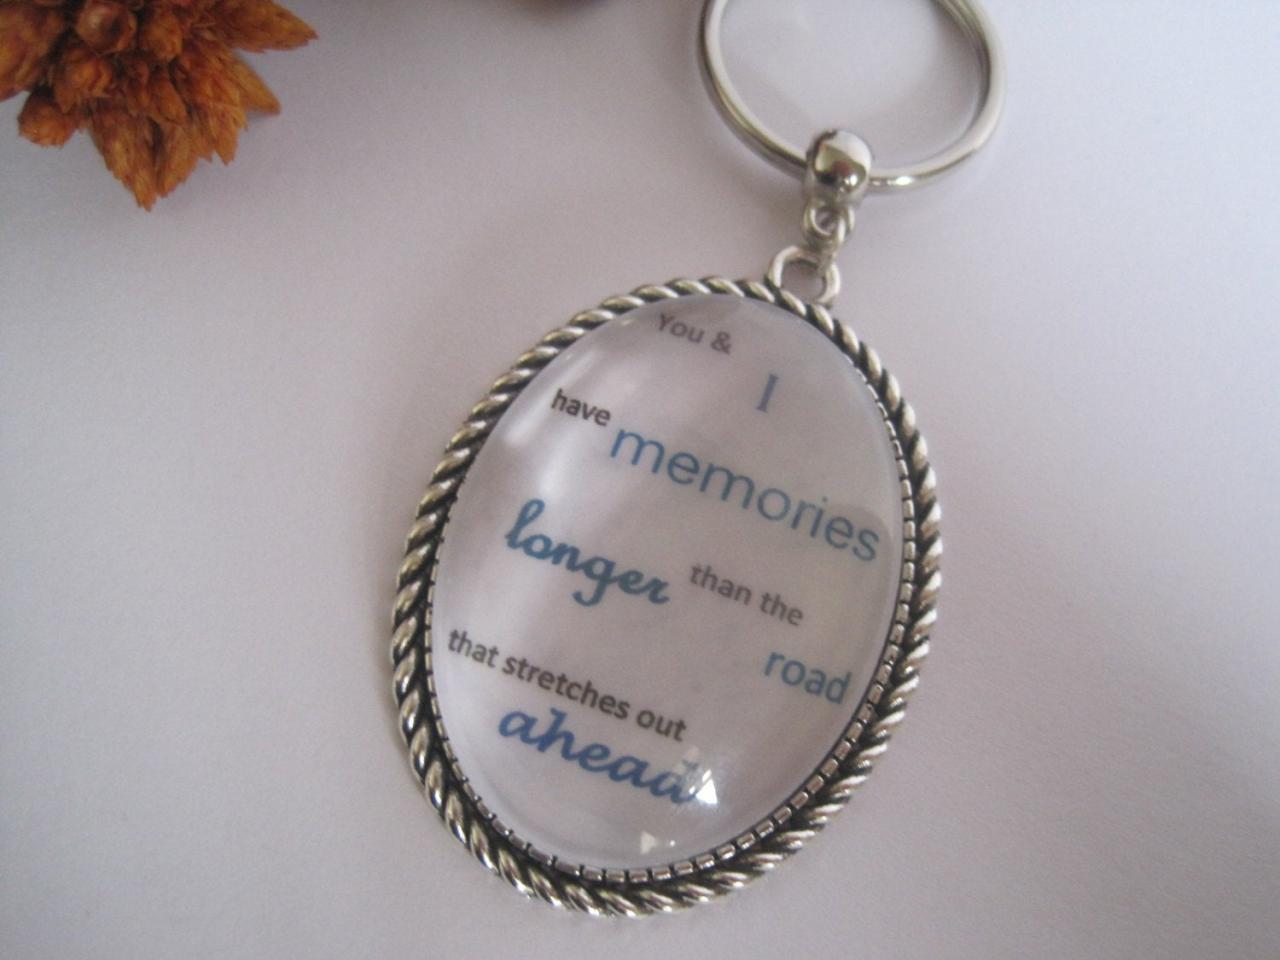 Quotation Keyring - You And I Have Memories Longer Than The Road That Stretches Out Ahead